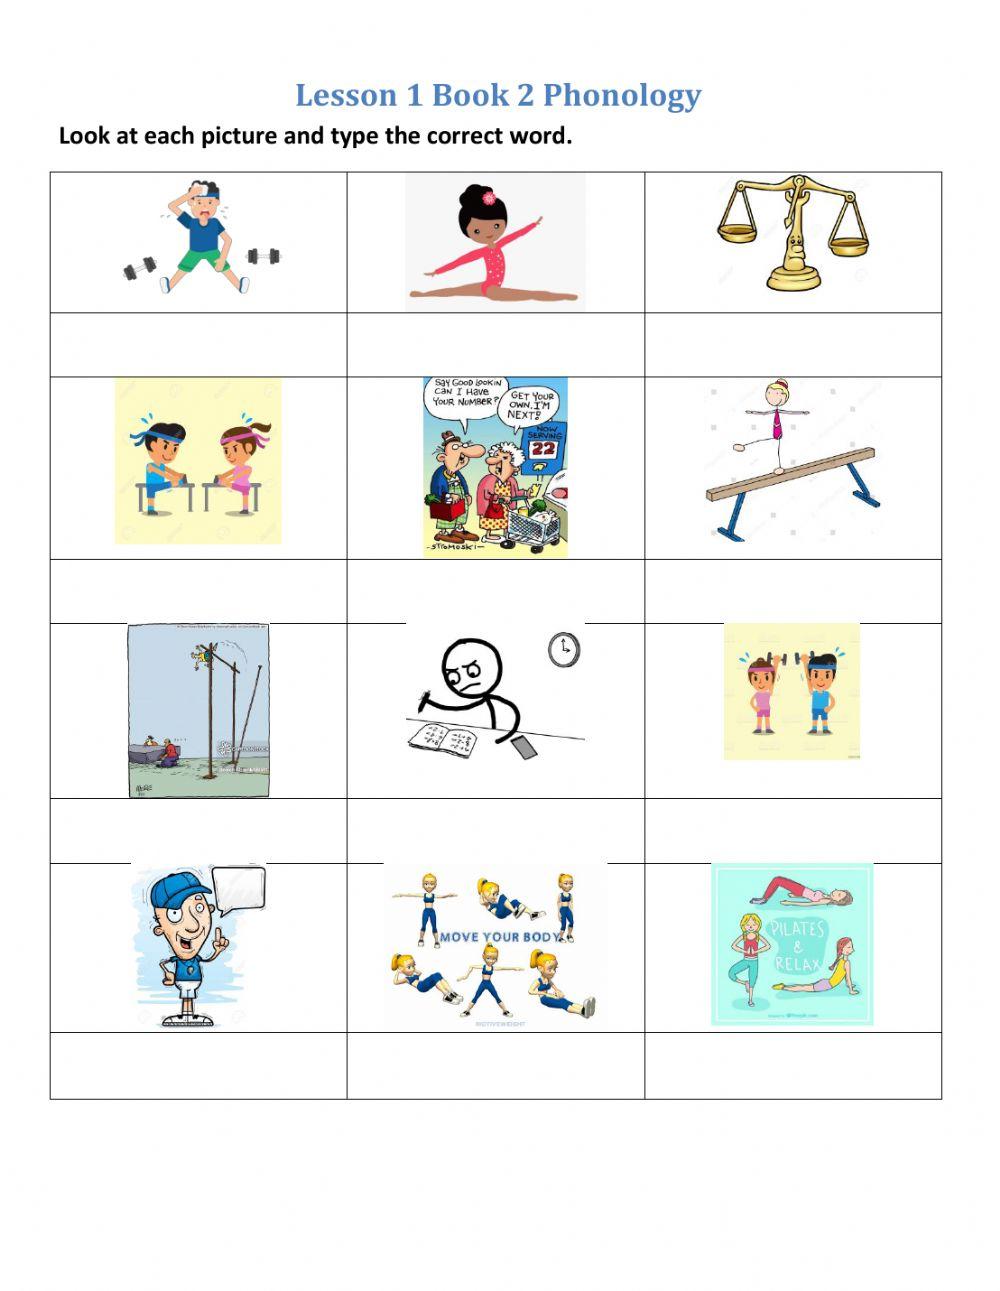 Phonology Lesson 1 Book 2